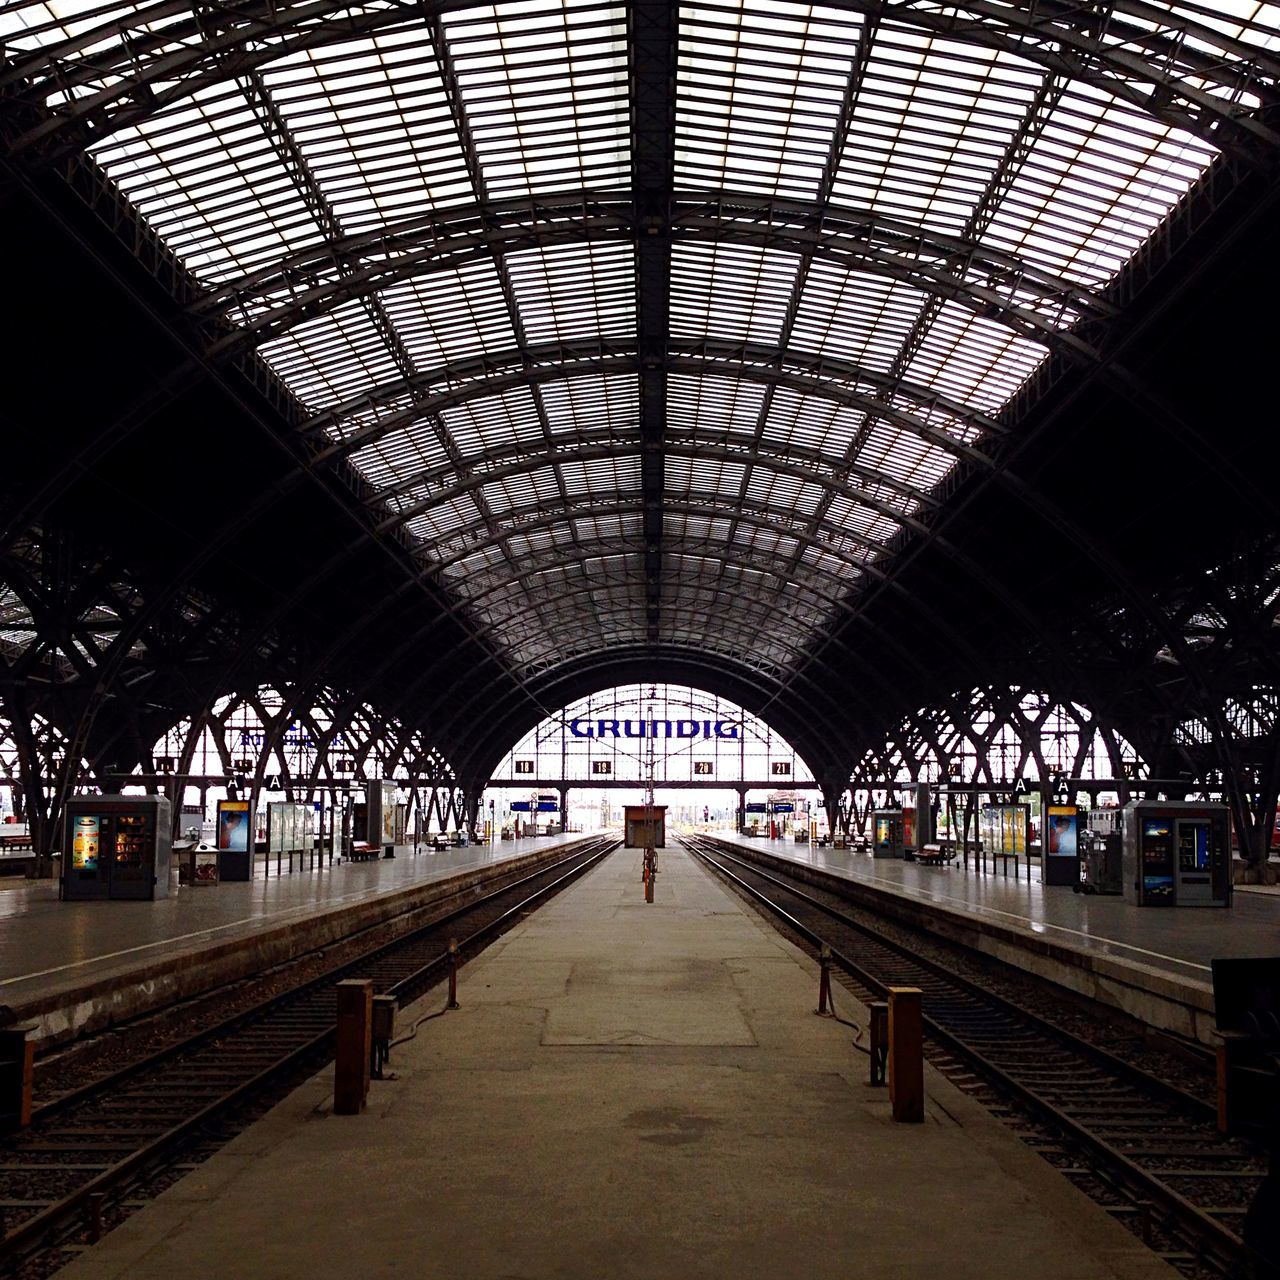 indoors, ceiling, architecture, built structure, the way forward, rail transportation, diminishing perspective, railroad station, railroad track, transportation, railroad station platform, public transportation, vanishing point, incidental people, interior, empty, arch, tunnel, transportation building - type of building, long